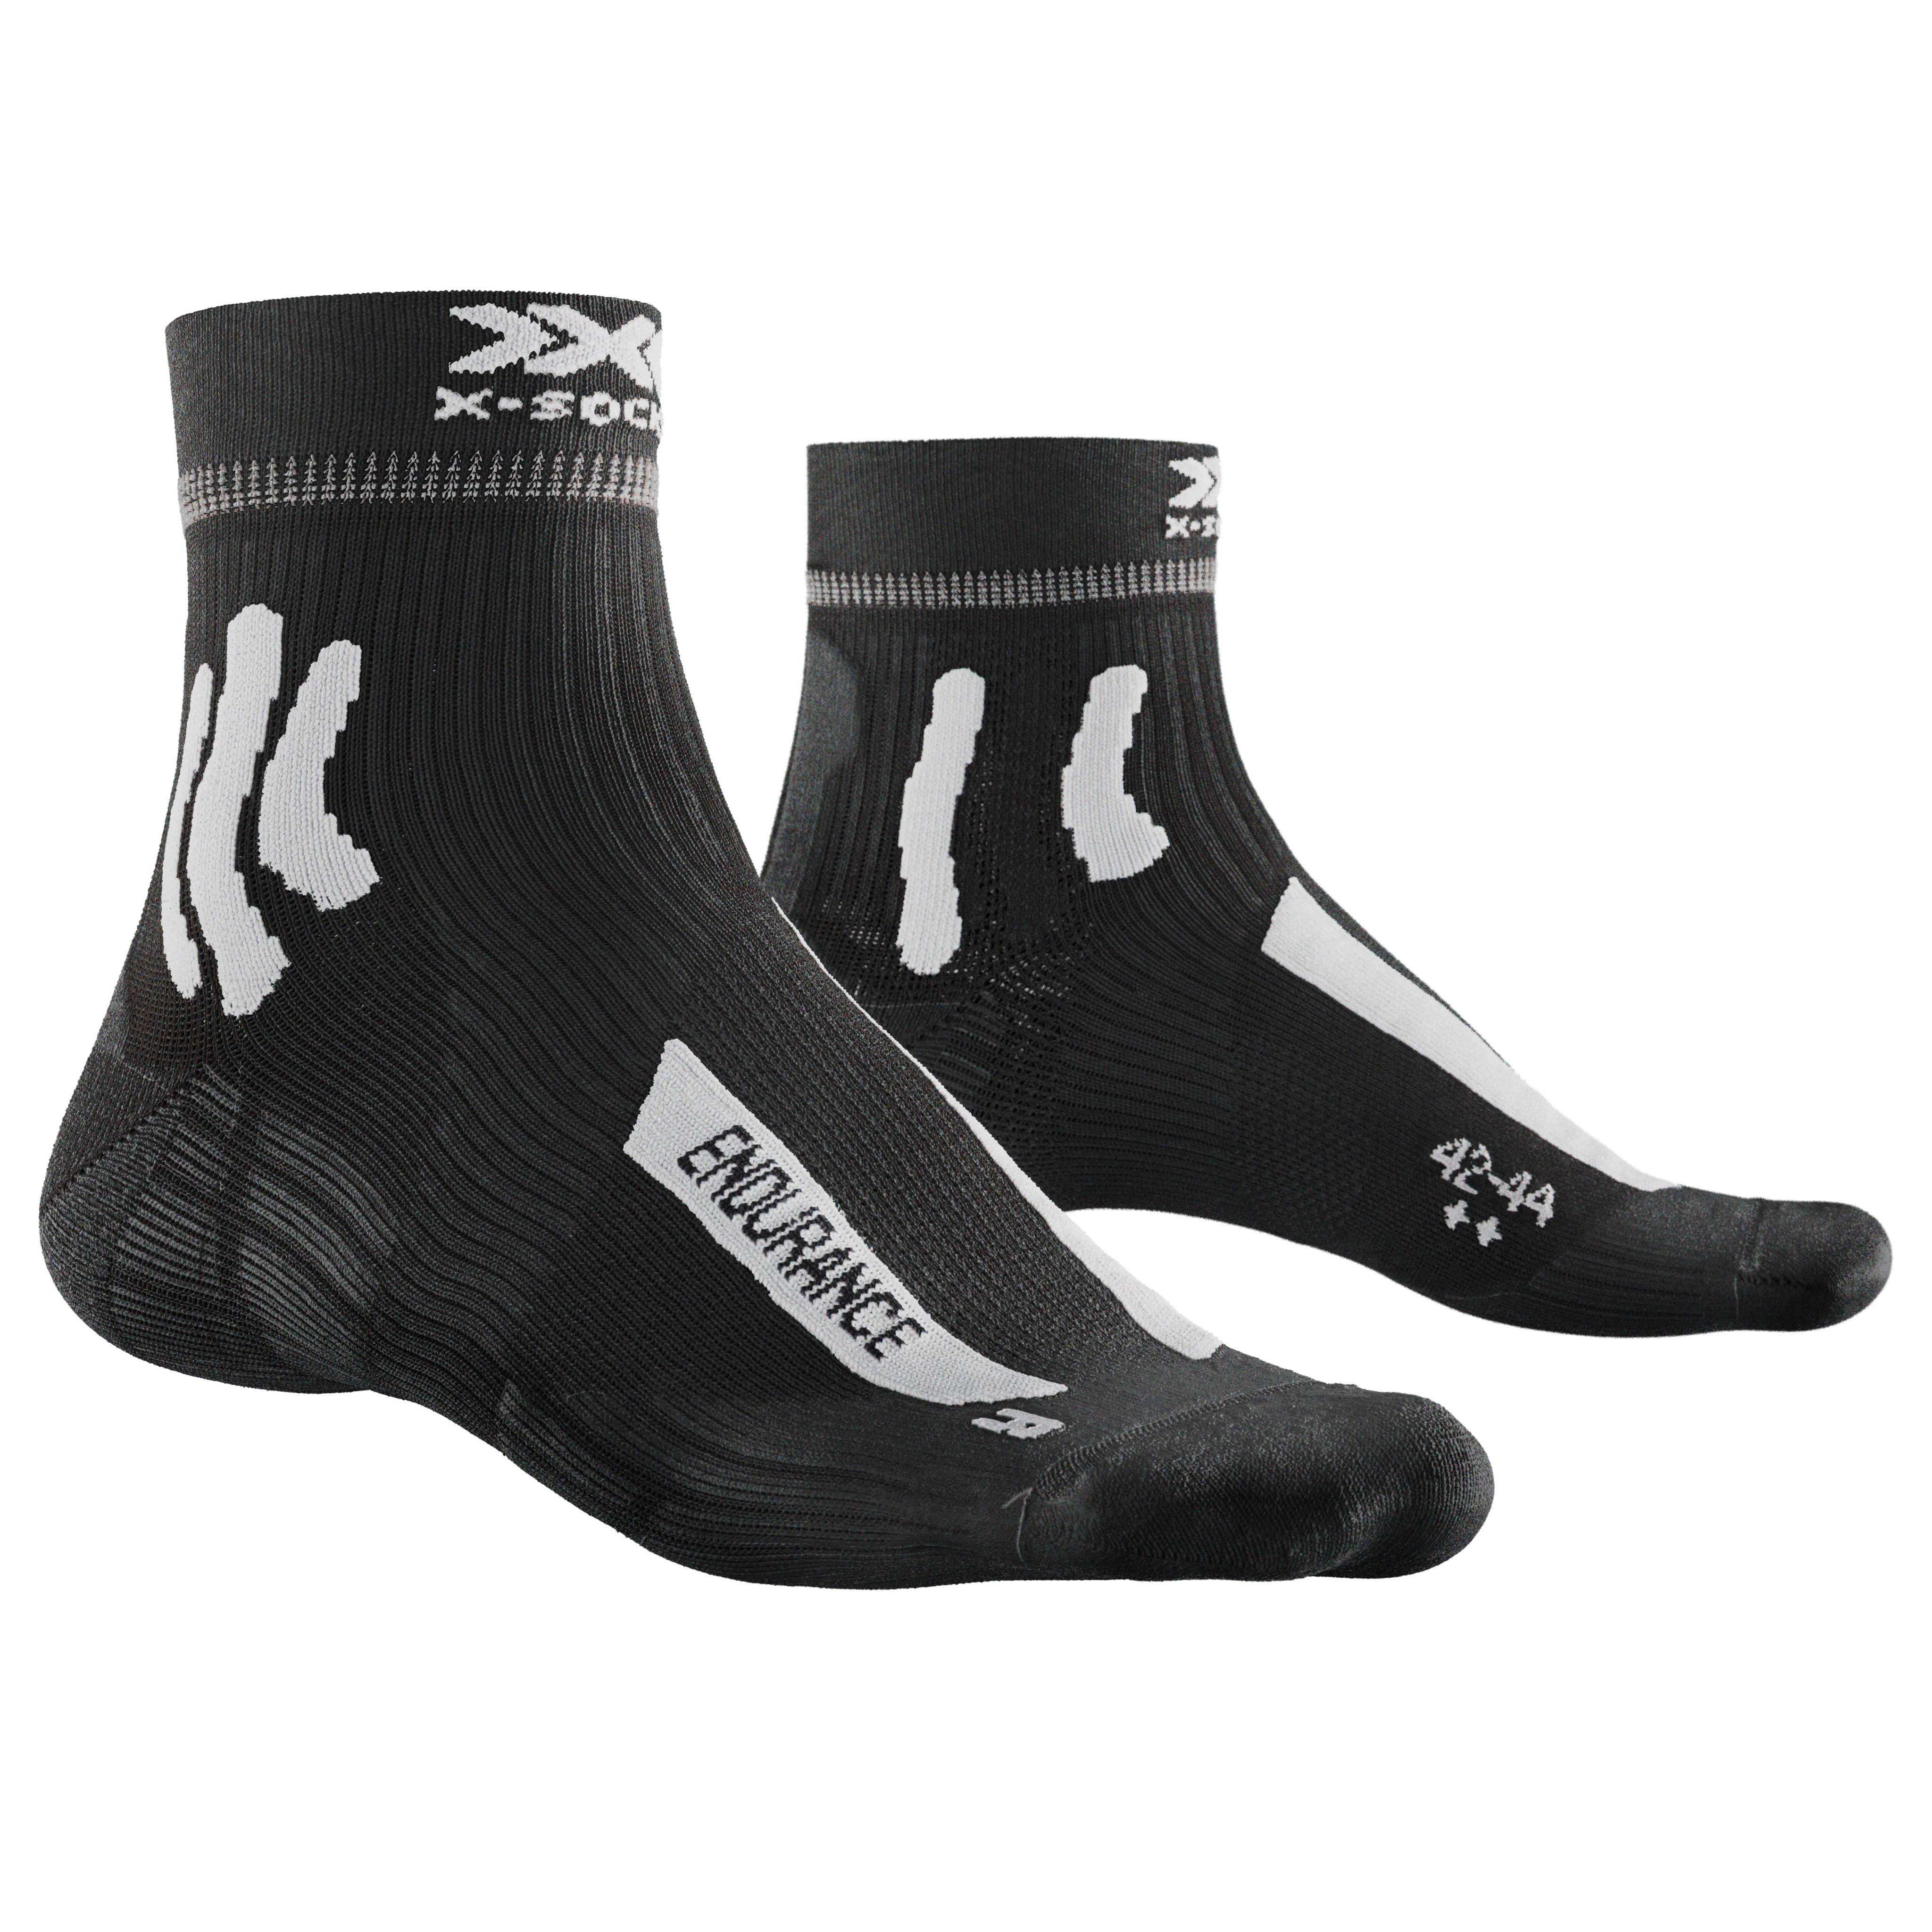 X-Socks Run Speed Two 4.0 - Calcetines running - Hombre